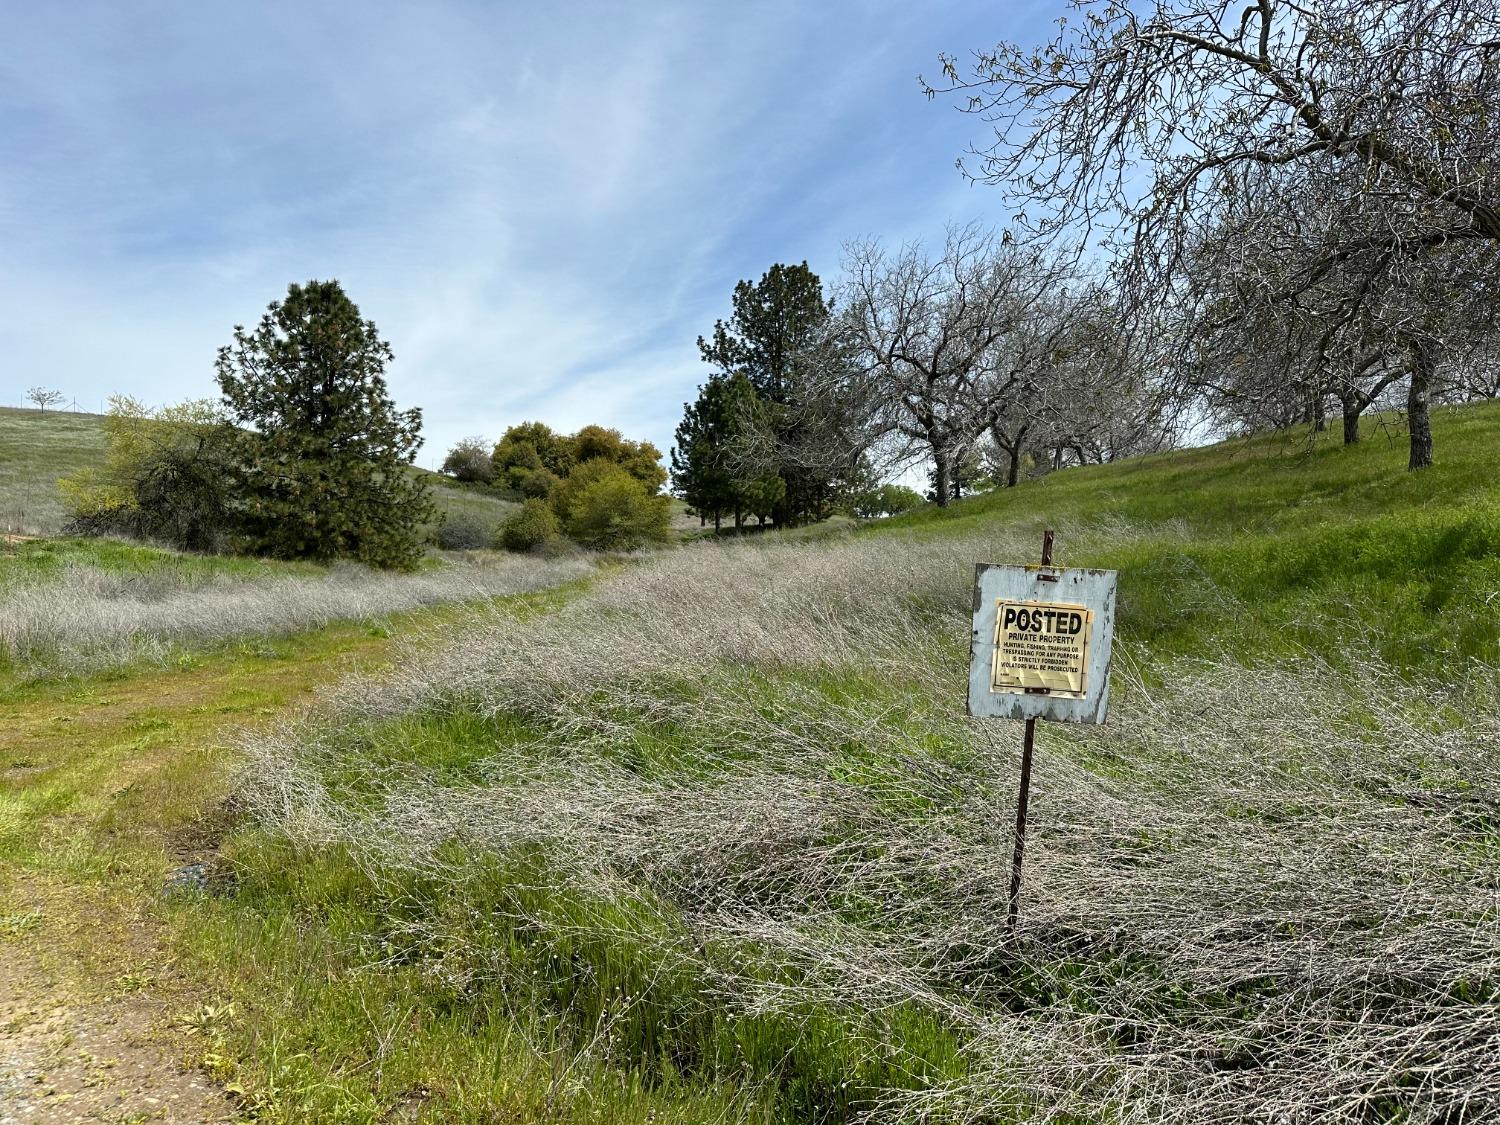 Amazing 3 parcel property, 36.7, 40, and 33.3 acres for a total of 110 acres. Adjacent to 1,592 acres of BLM land. Killer 360 views at the top of the property. Overlooking vineyards and Perry Creek Winery. 1 seasonal and 1 large year round ponds. Great rock outcroppings. Previously 75 planted acres of Walnut trees. Located in the heart of the Fair Play AVA in El Dorado County. This property is ready for planting and building your winery estate and tasting room. Opportunity awaits.